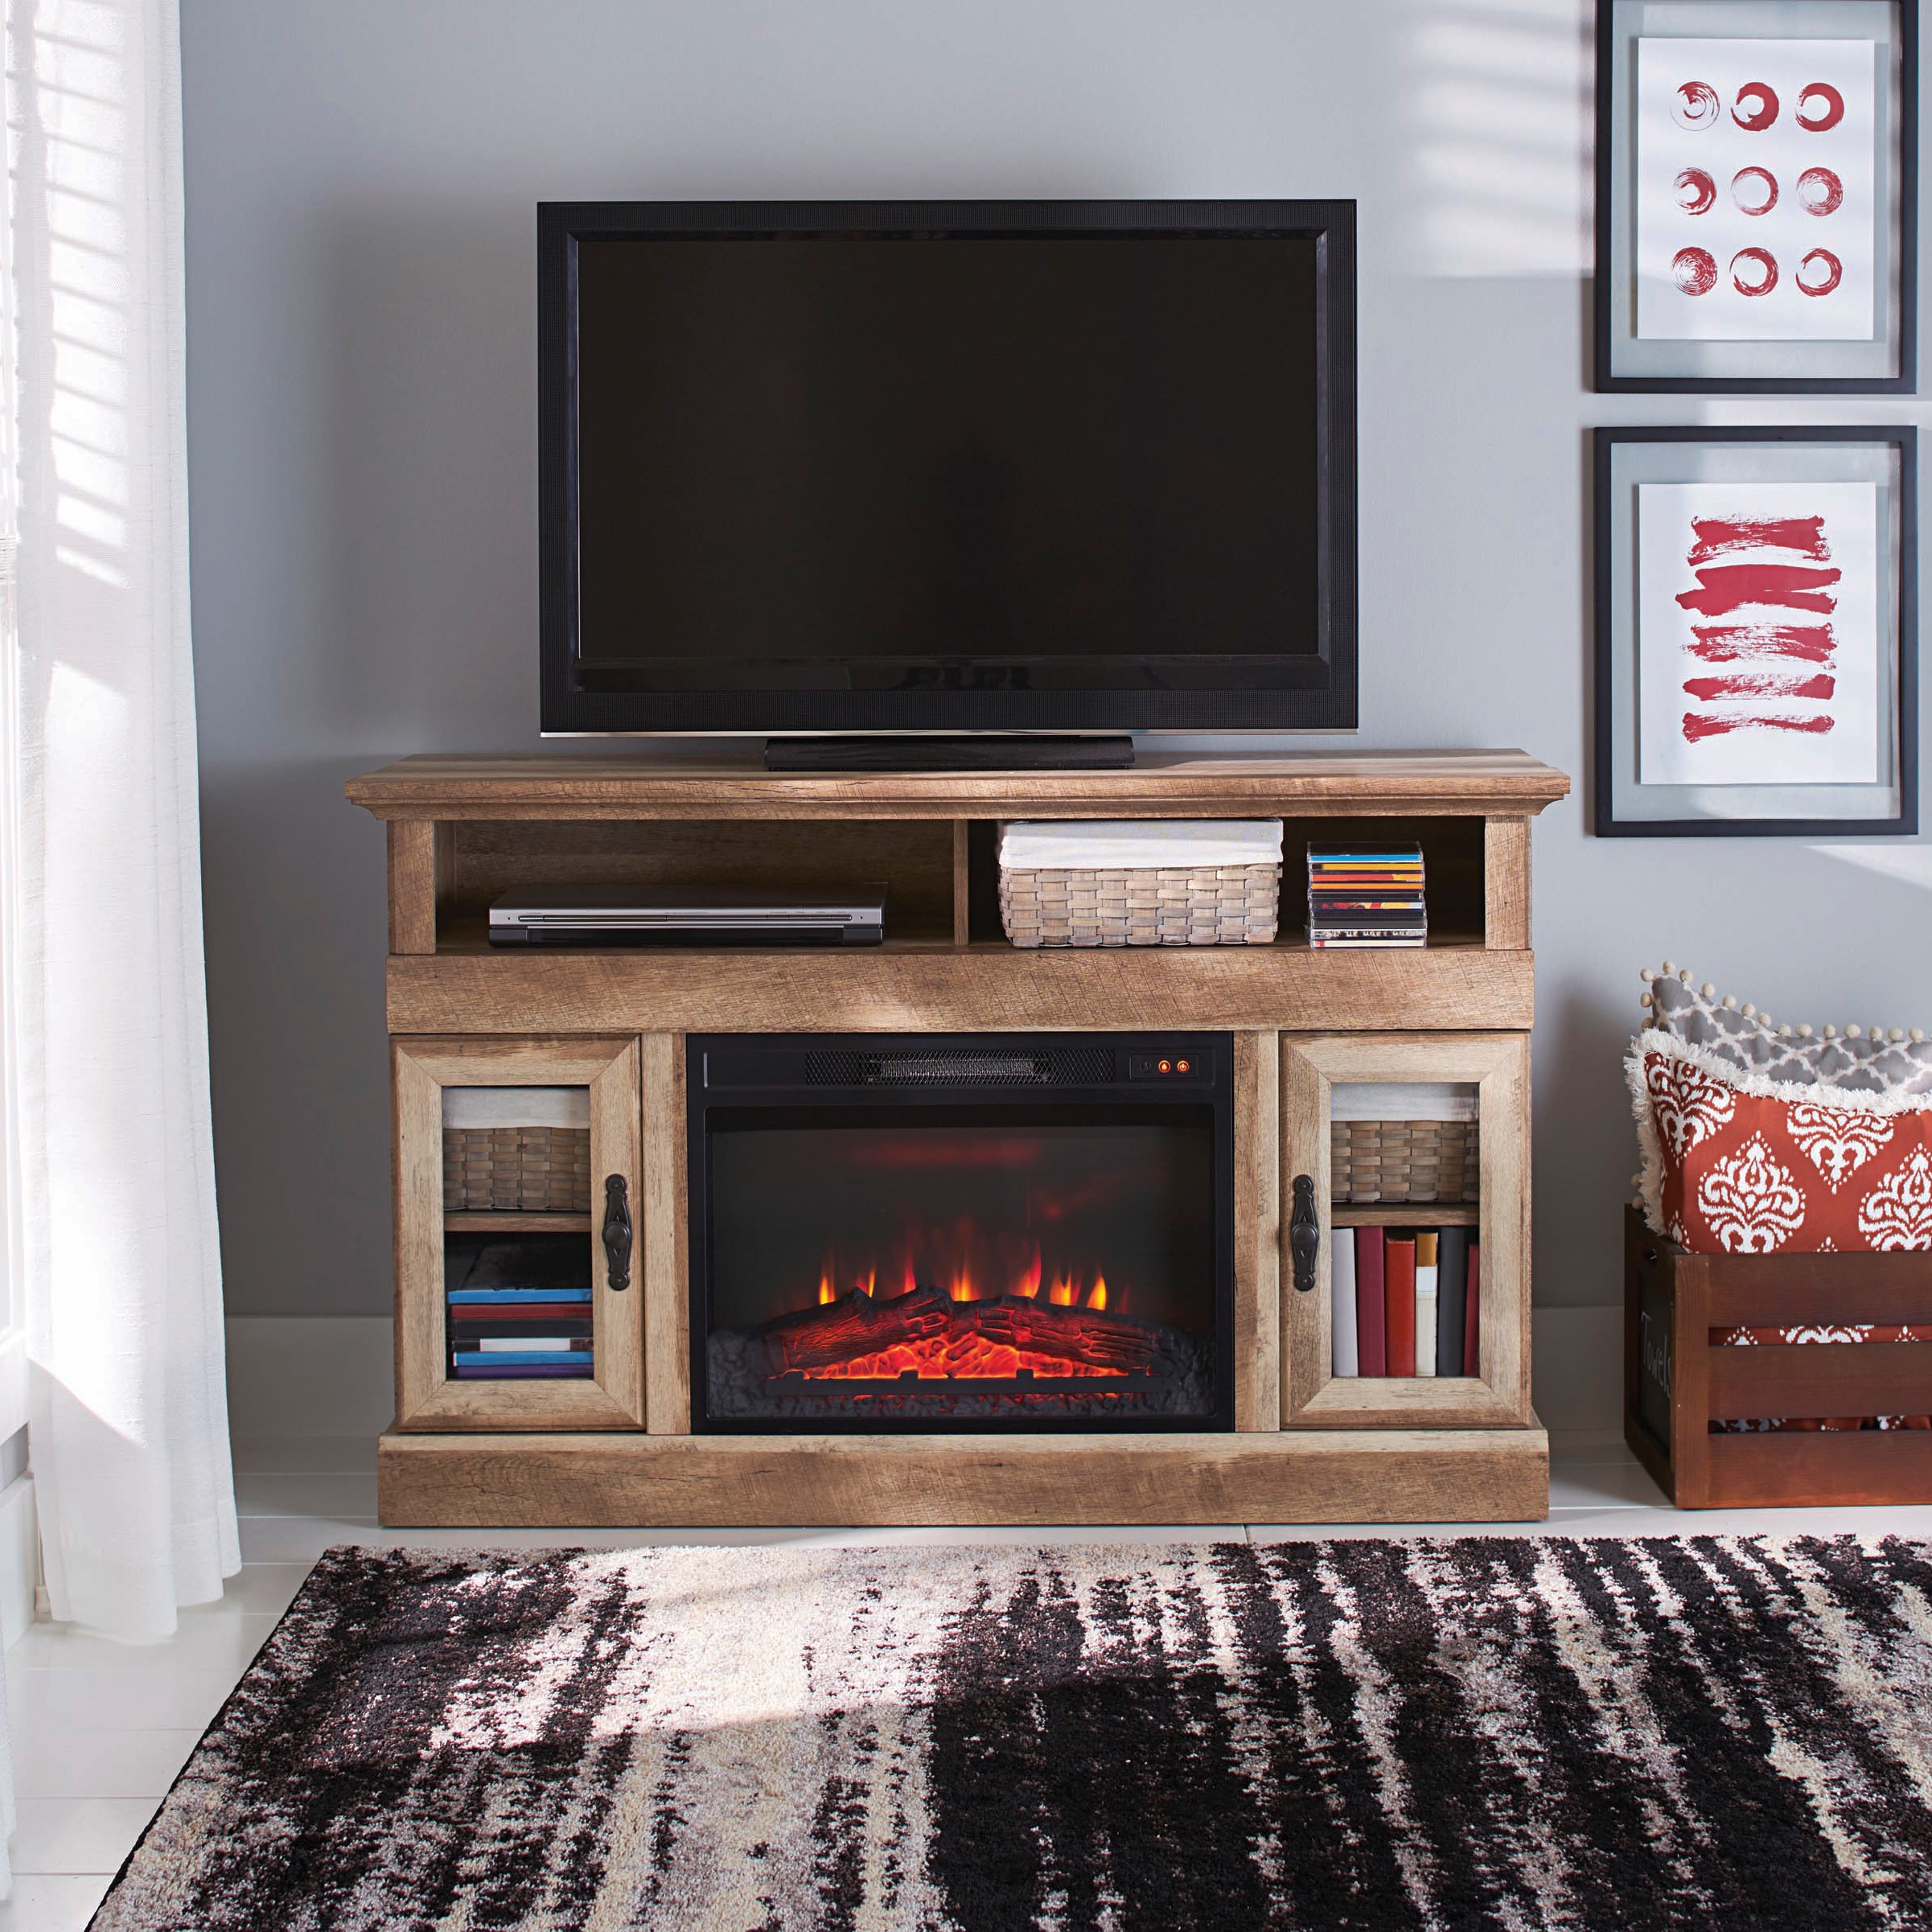 Better Homes & Gardens Crossmill Fireplace Media Console, for TVs up to 60", Weathered Pine Finish - image 1 of 8